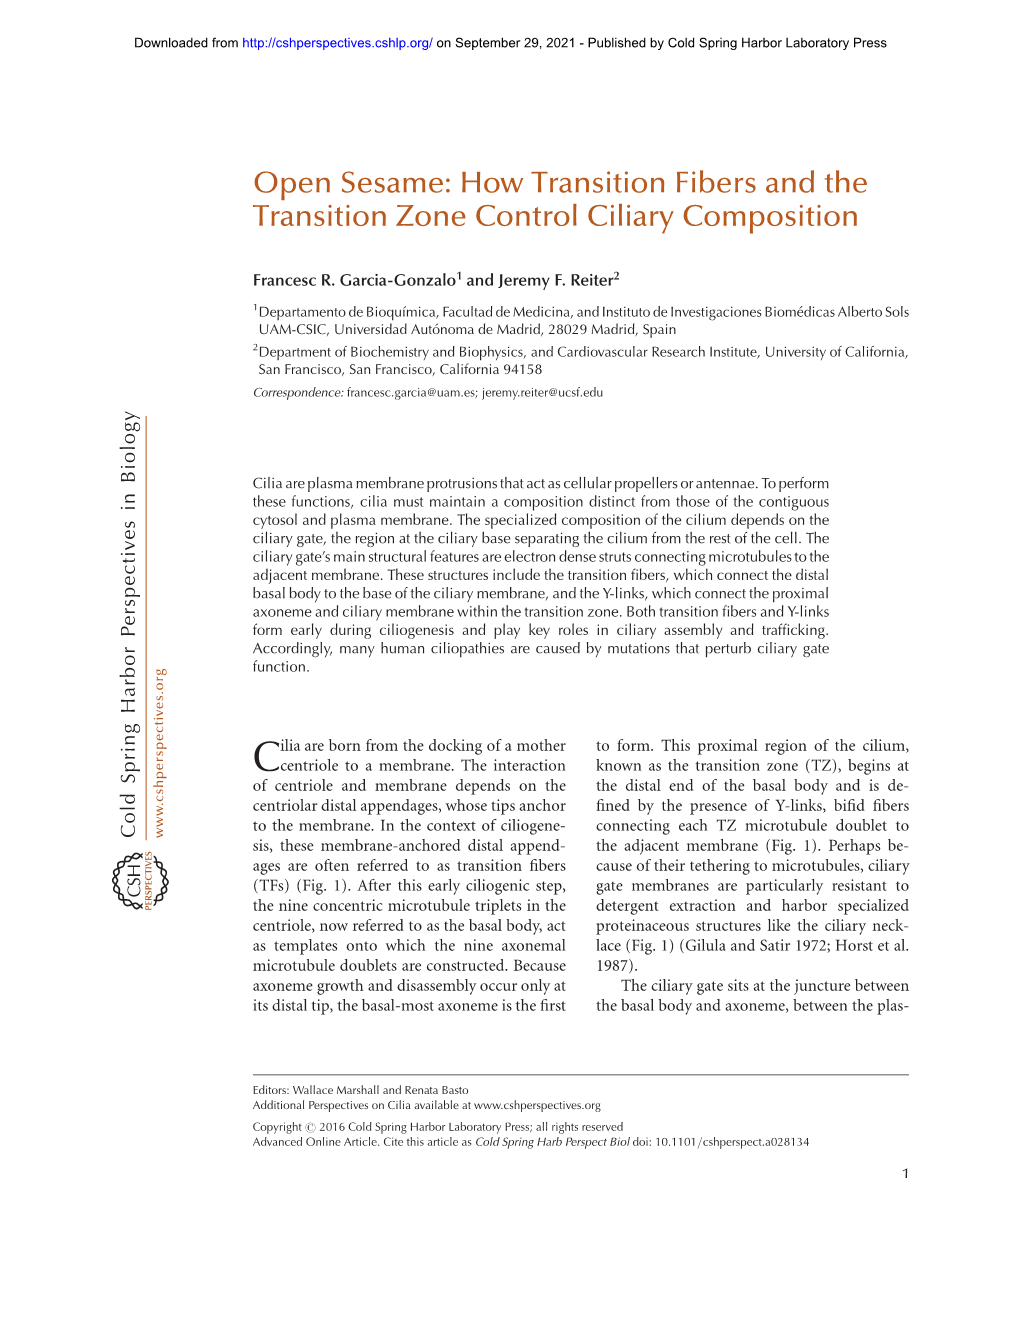 Open Sesame: How Transition Fibers and the Transition Zone Control Ciliary Composition